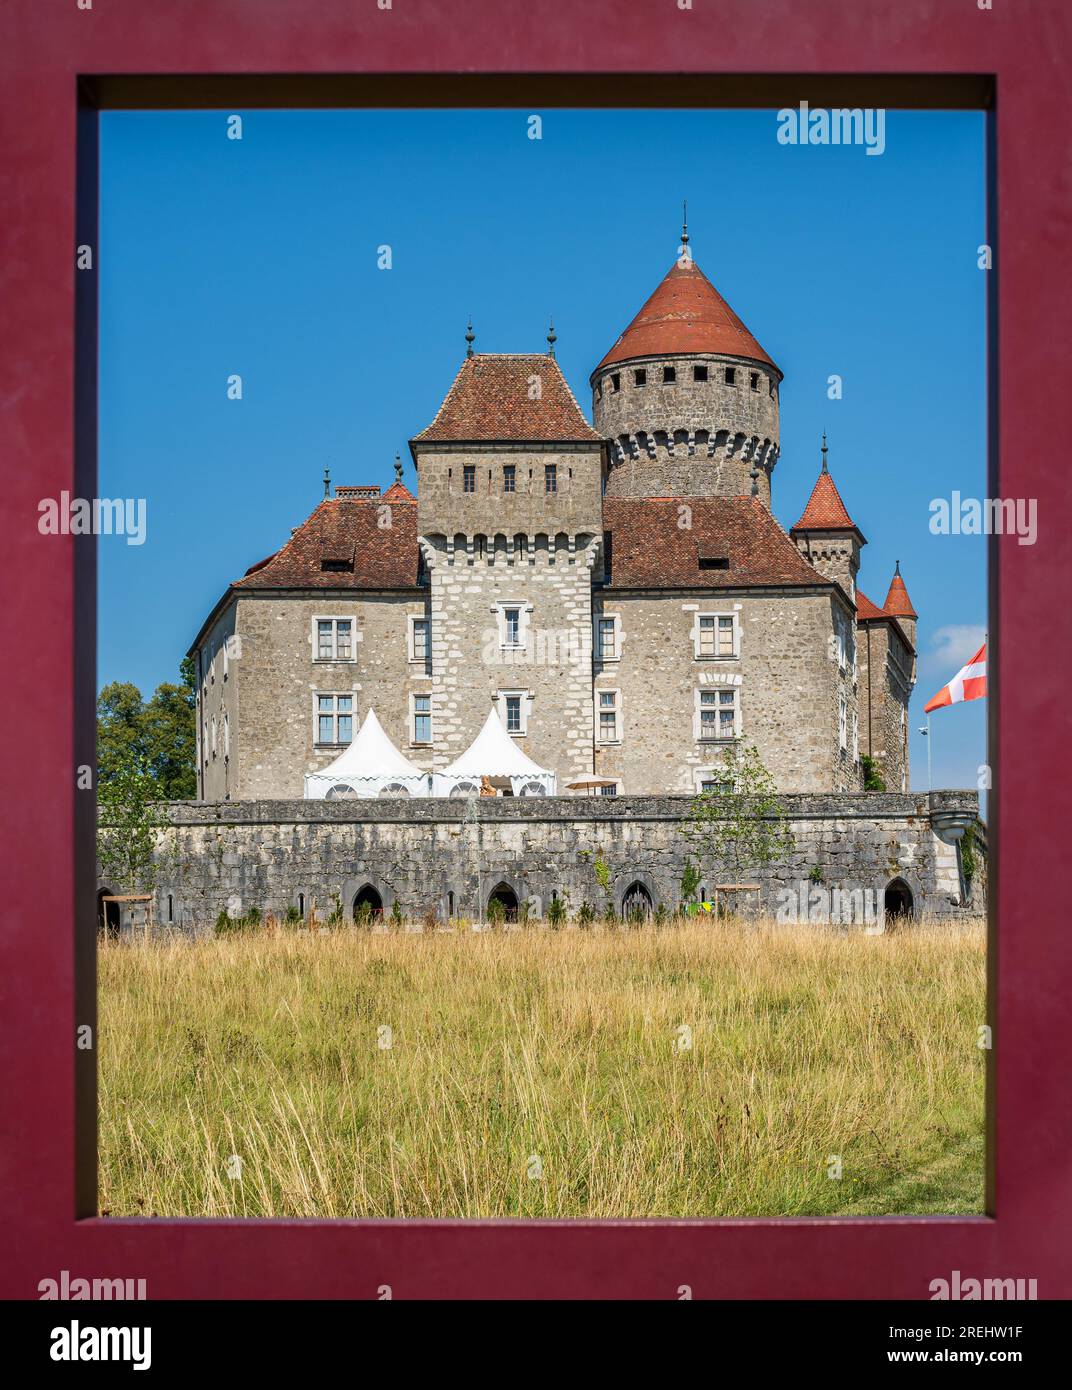 Montrottier castle within a red frame in summer, located in Lovagny, in Haute-Savoie department, France. Stock Photo